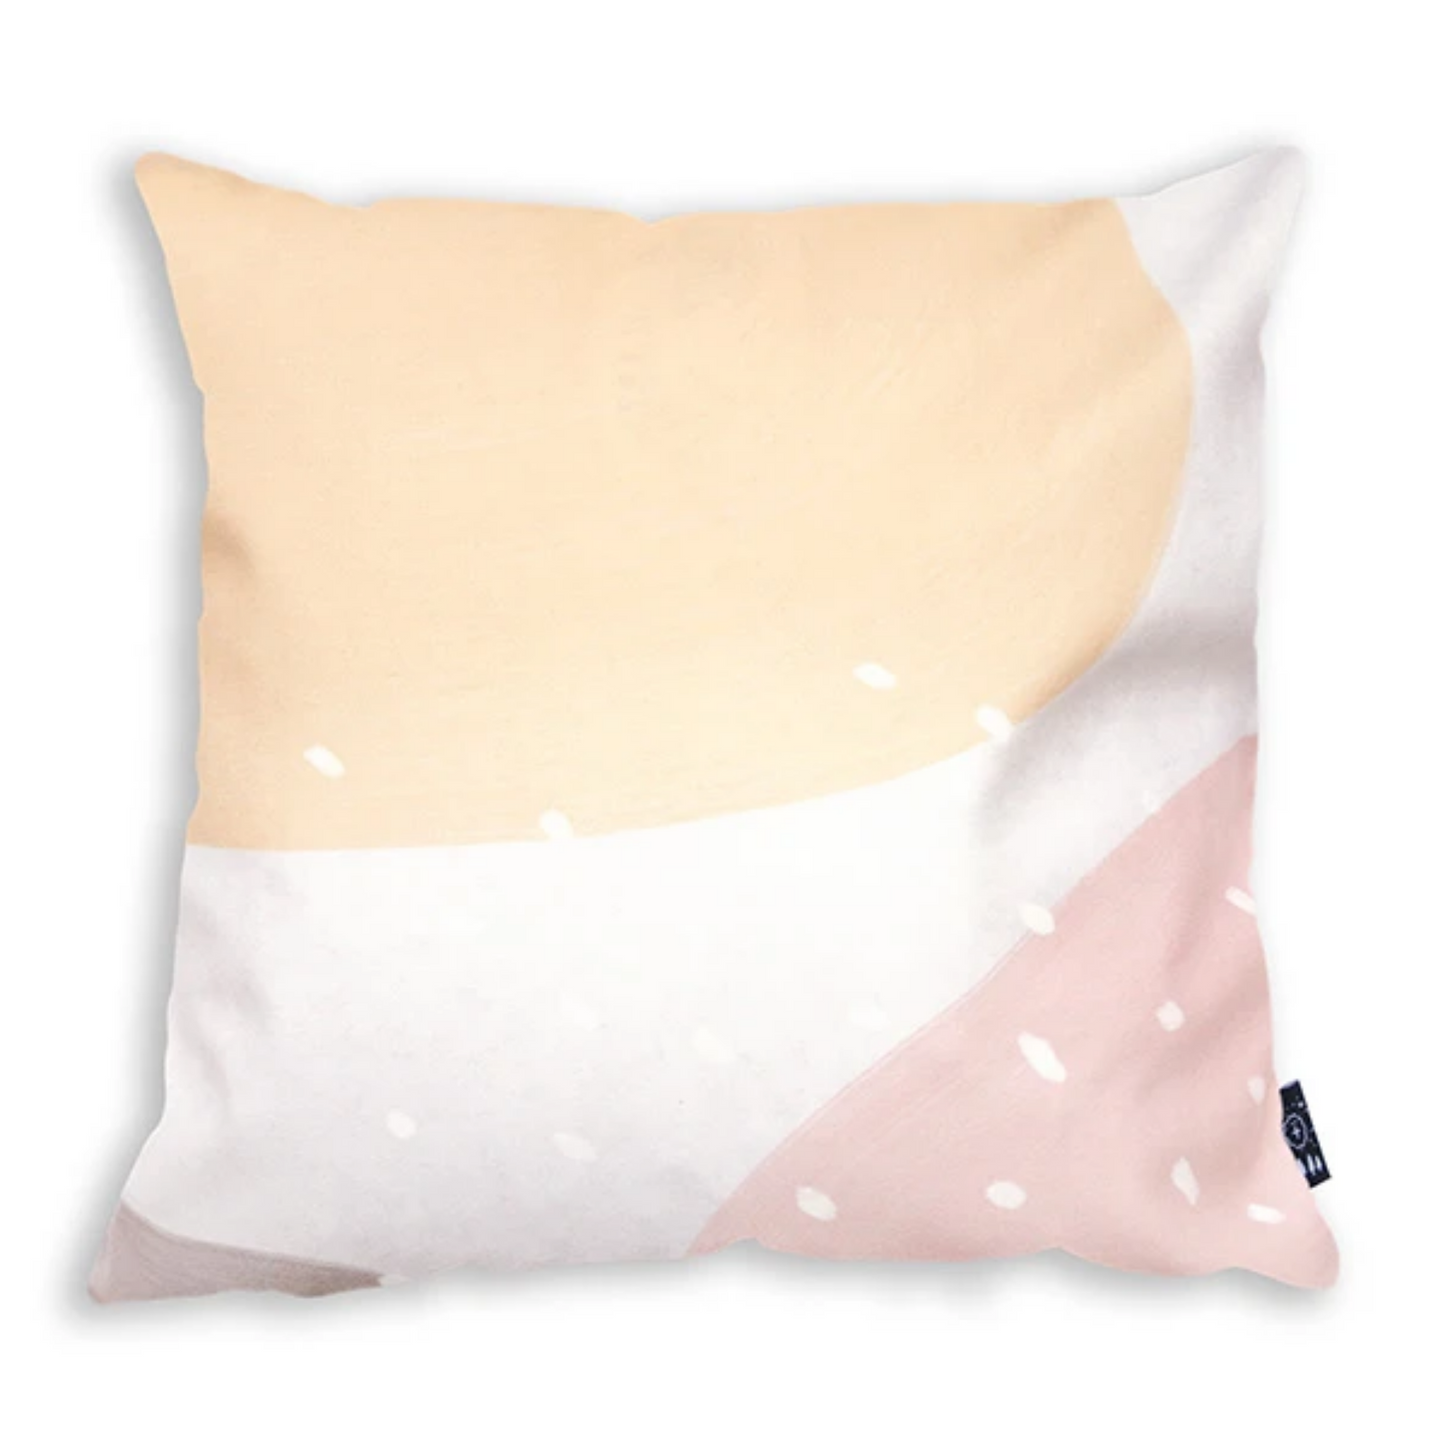 See You Again And Rejoice - Cushion Cover